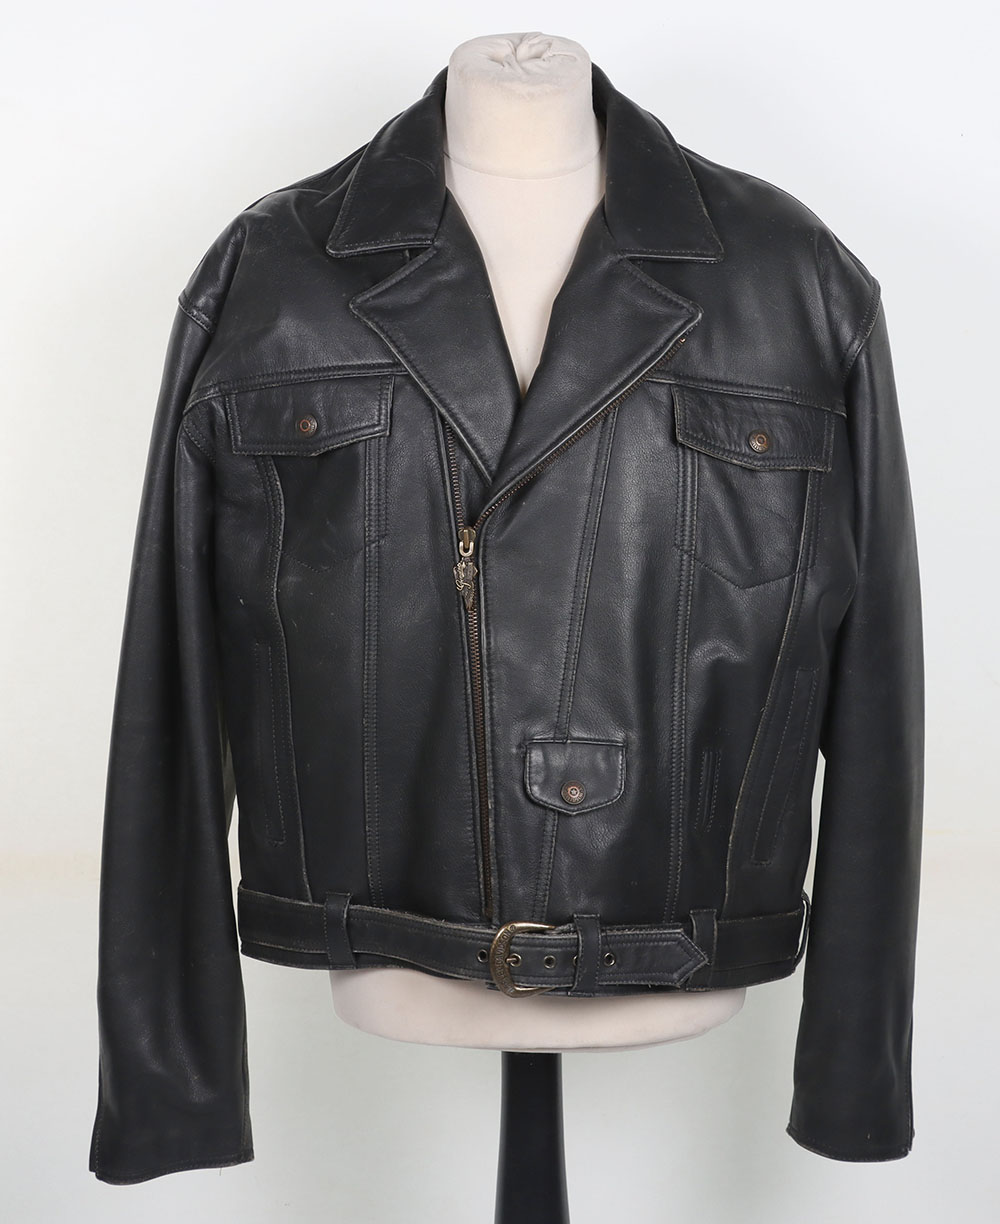 Harley Davidson Leather Motorcycle Jacket ‘An American Legend’